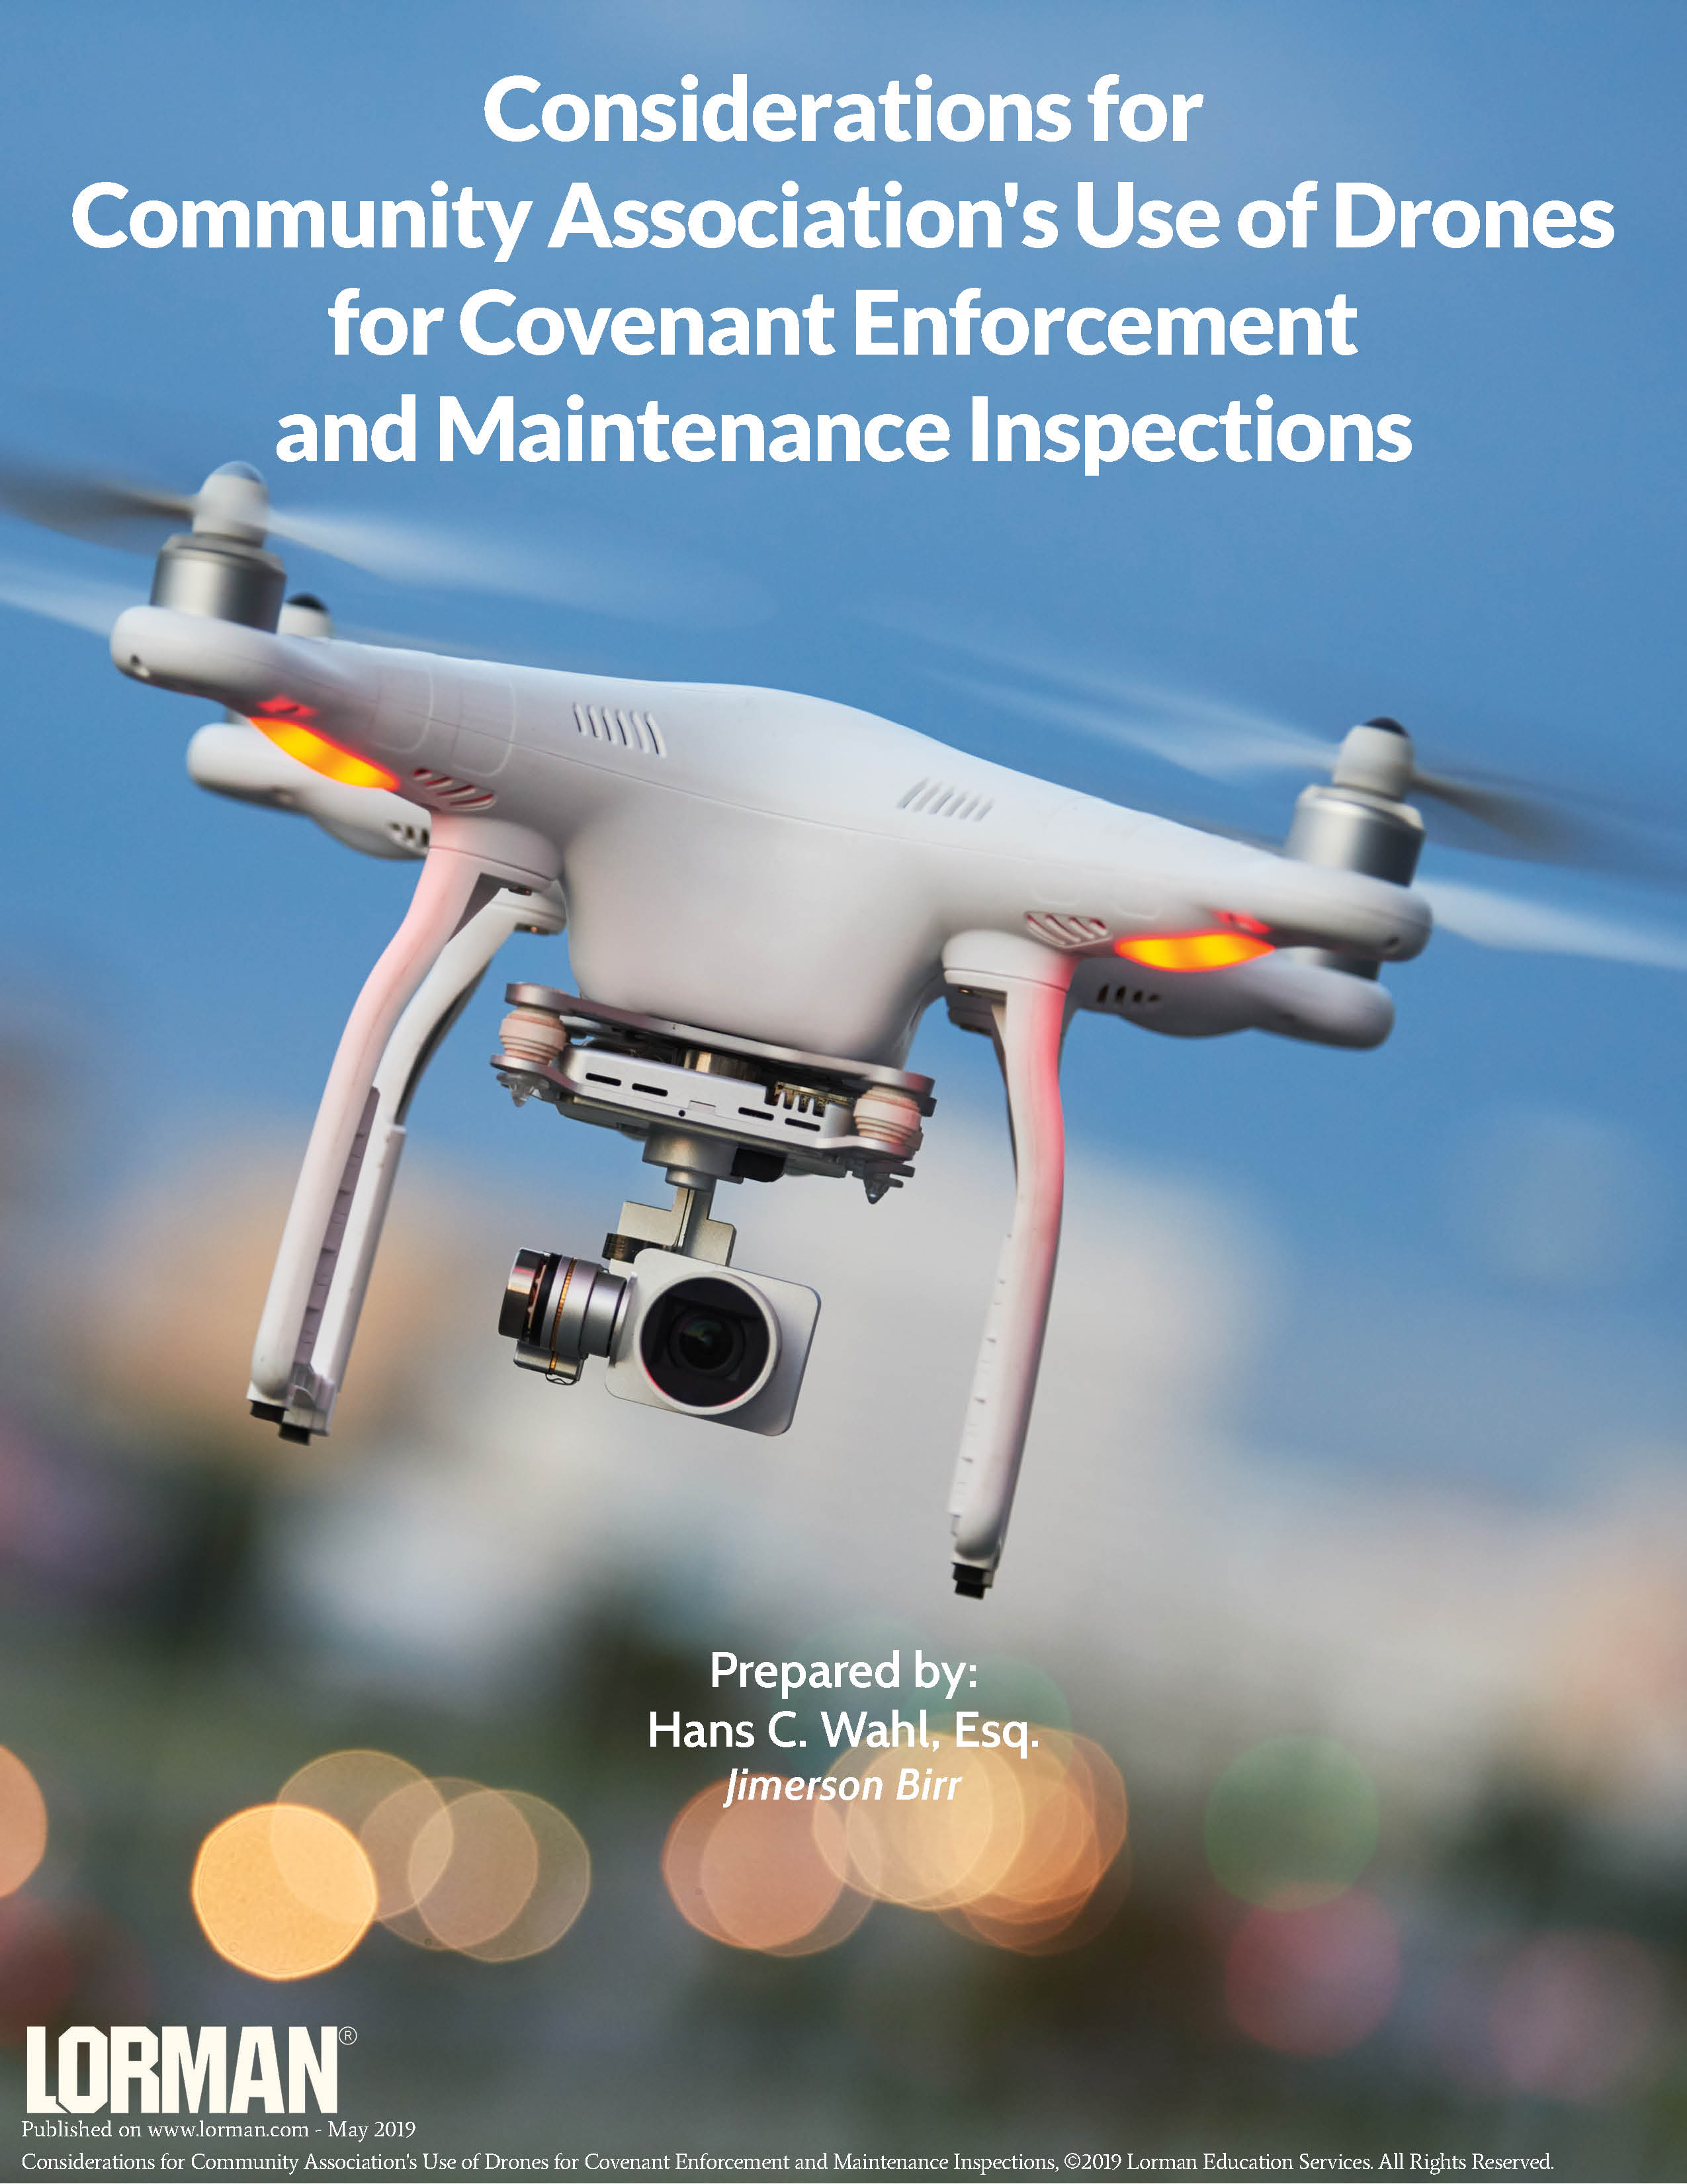 Community Association's Use of Drones for Covenant Enforcement and Maintenance Inspections